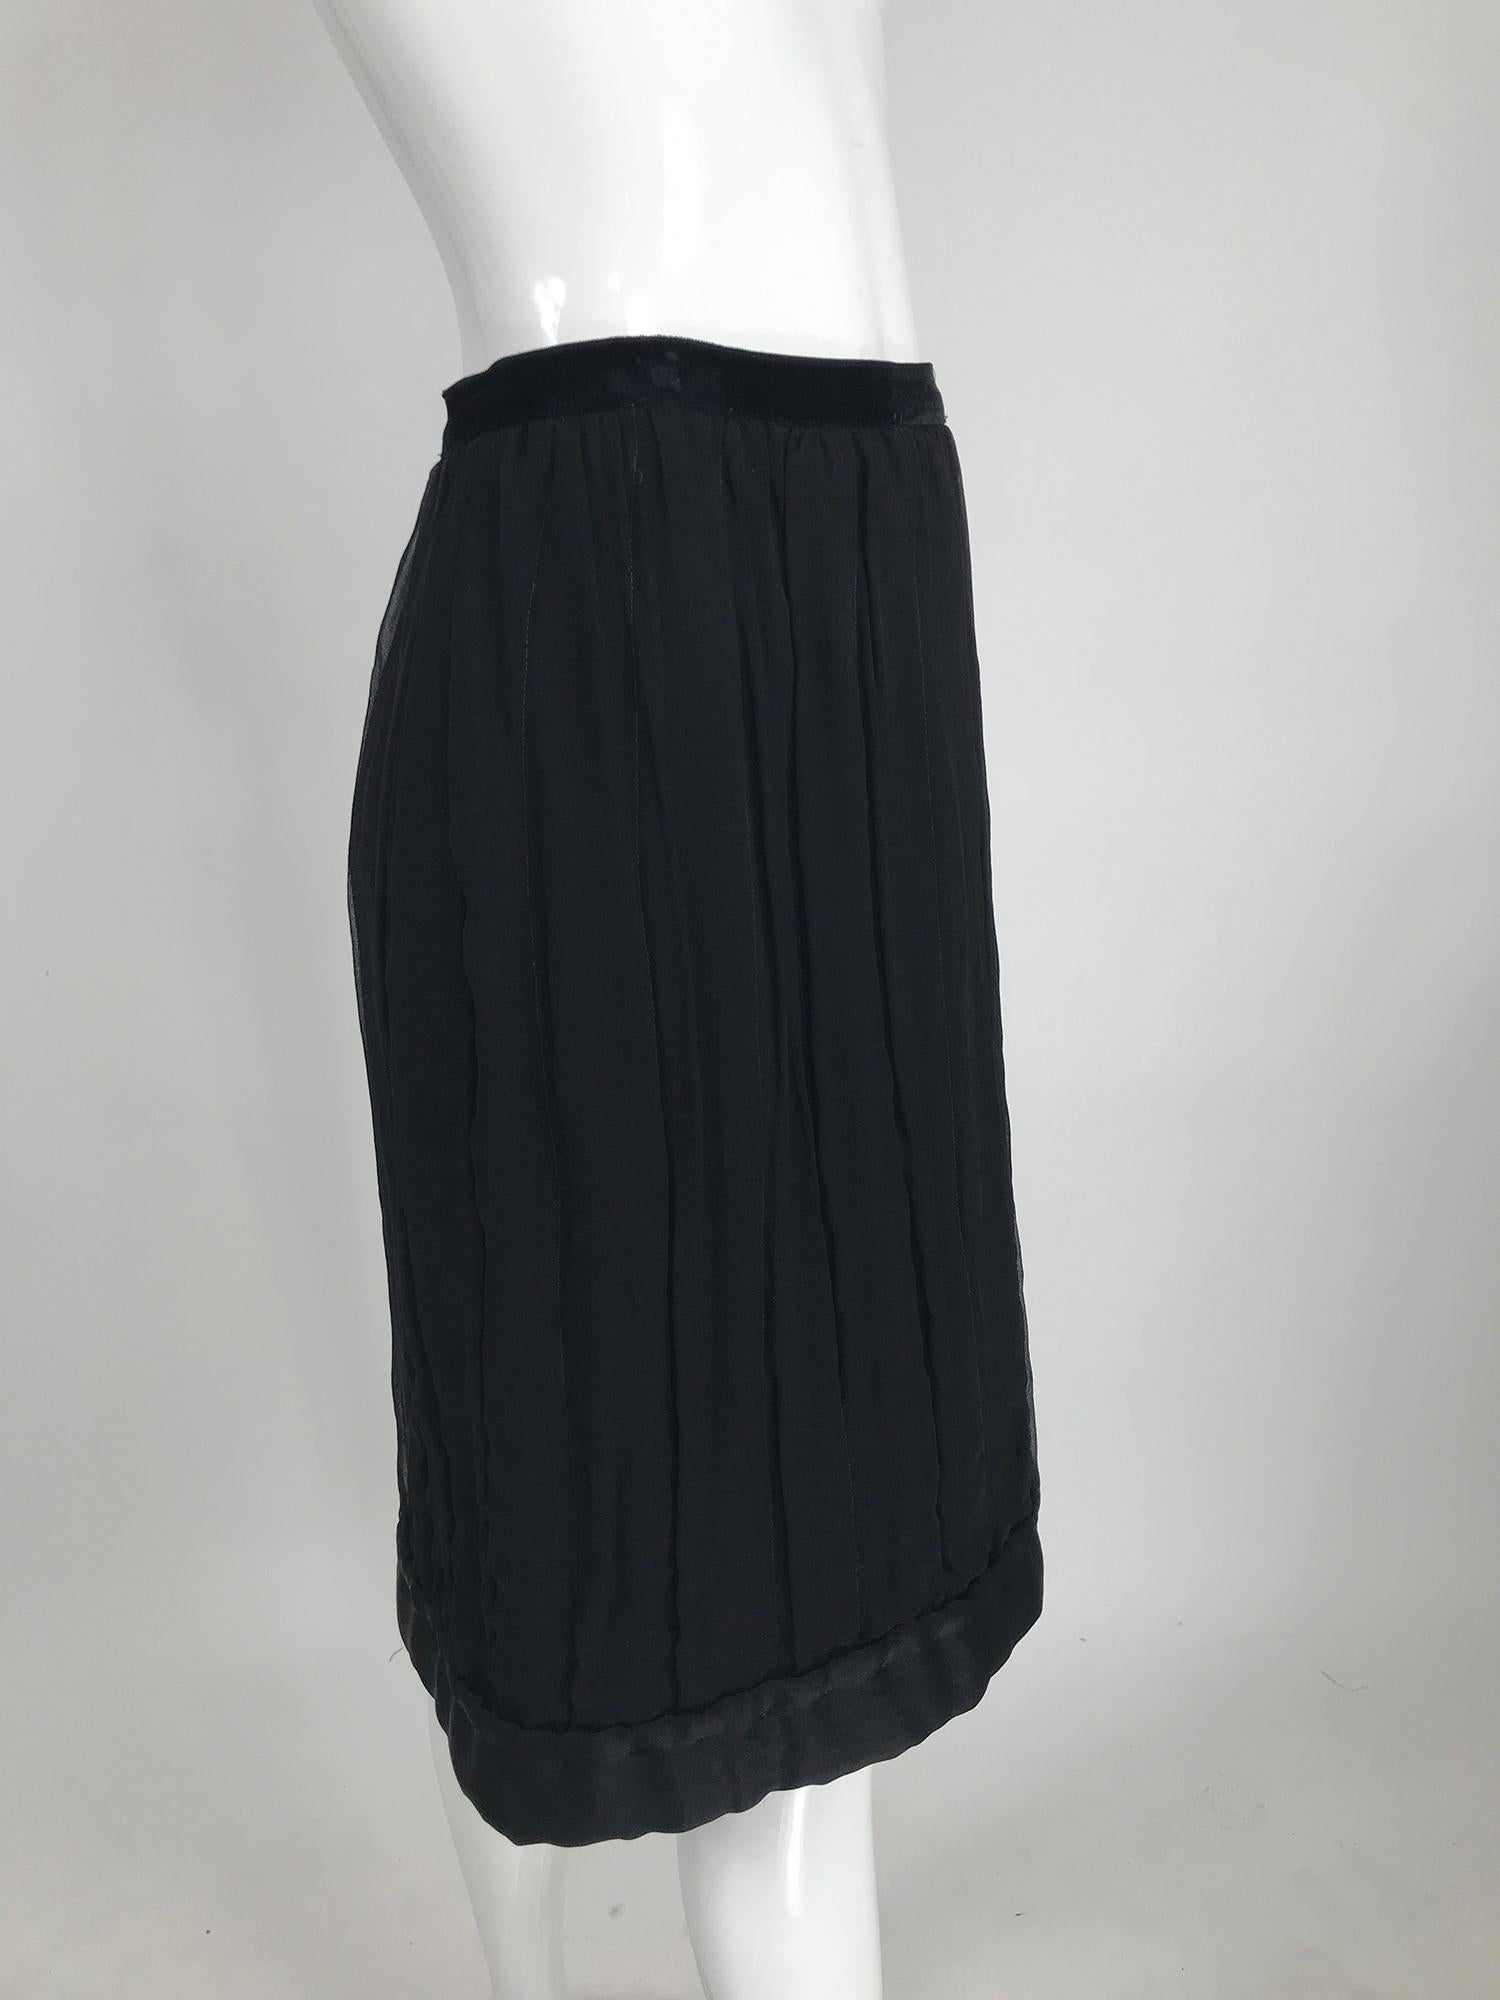 Lanvin Hiver 2006 Black Silk Skirt with Side Button Closure.  For Sale 1